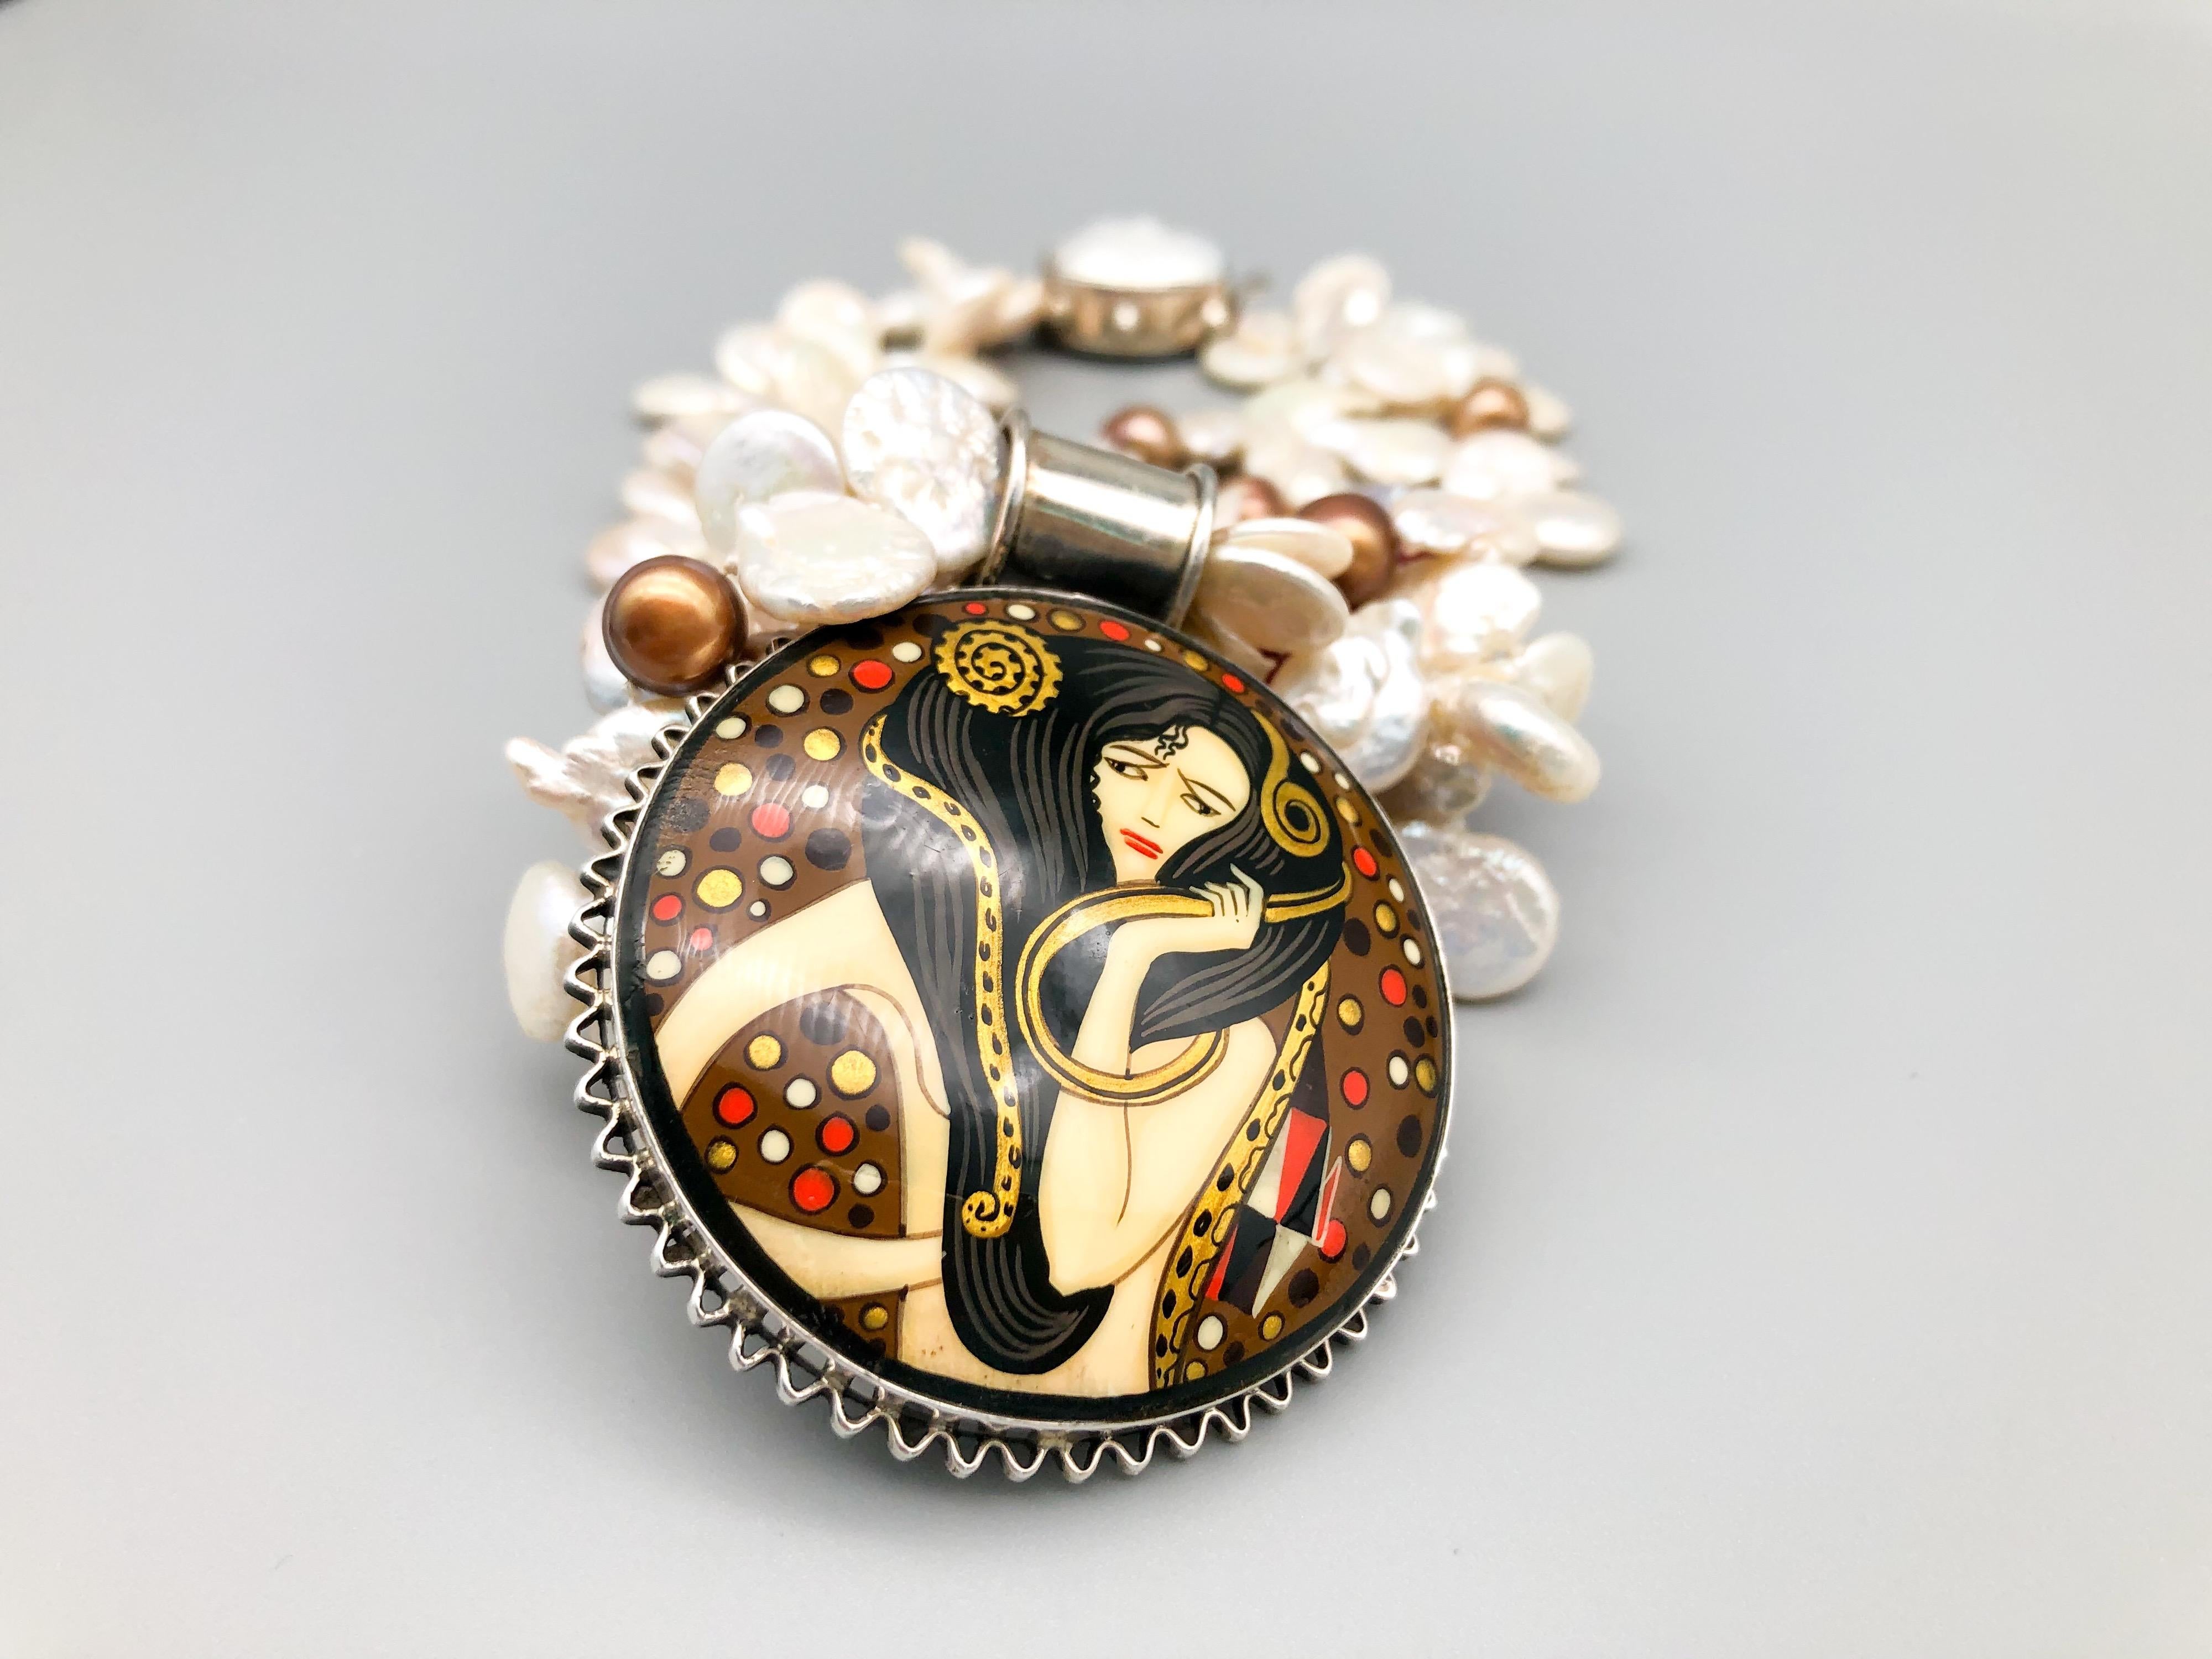 Mixed Cut A.Jeschel Russian miniature pendant painted in the style of Klimt